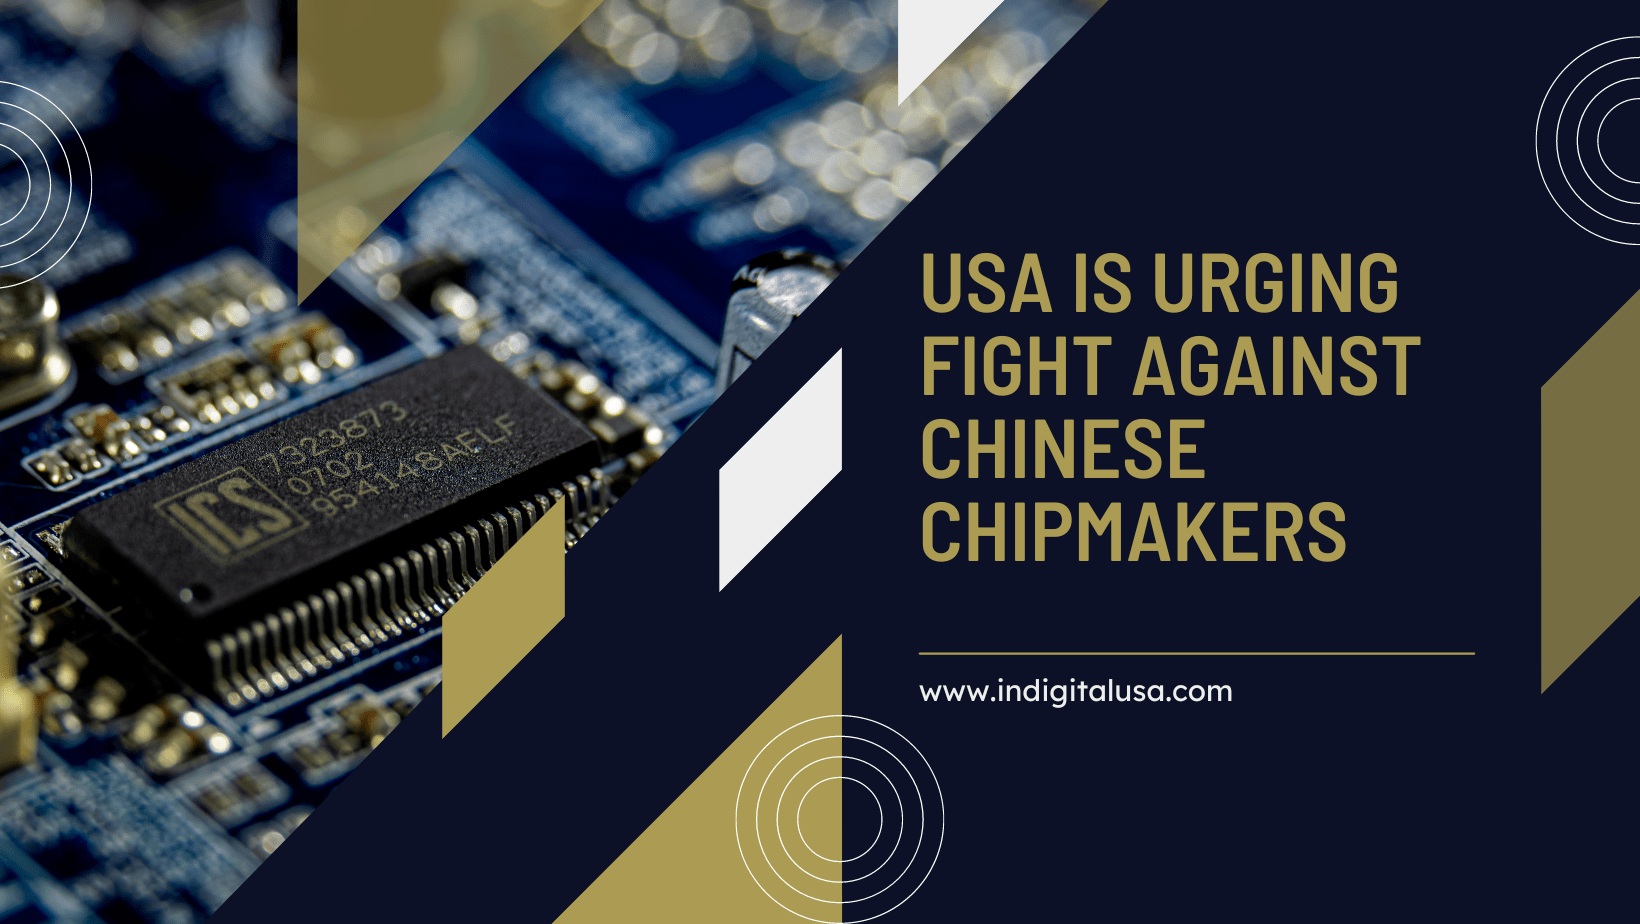 USA is urging fight against Chinese chipmakers